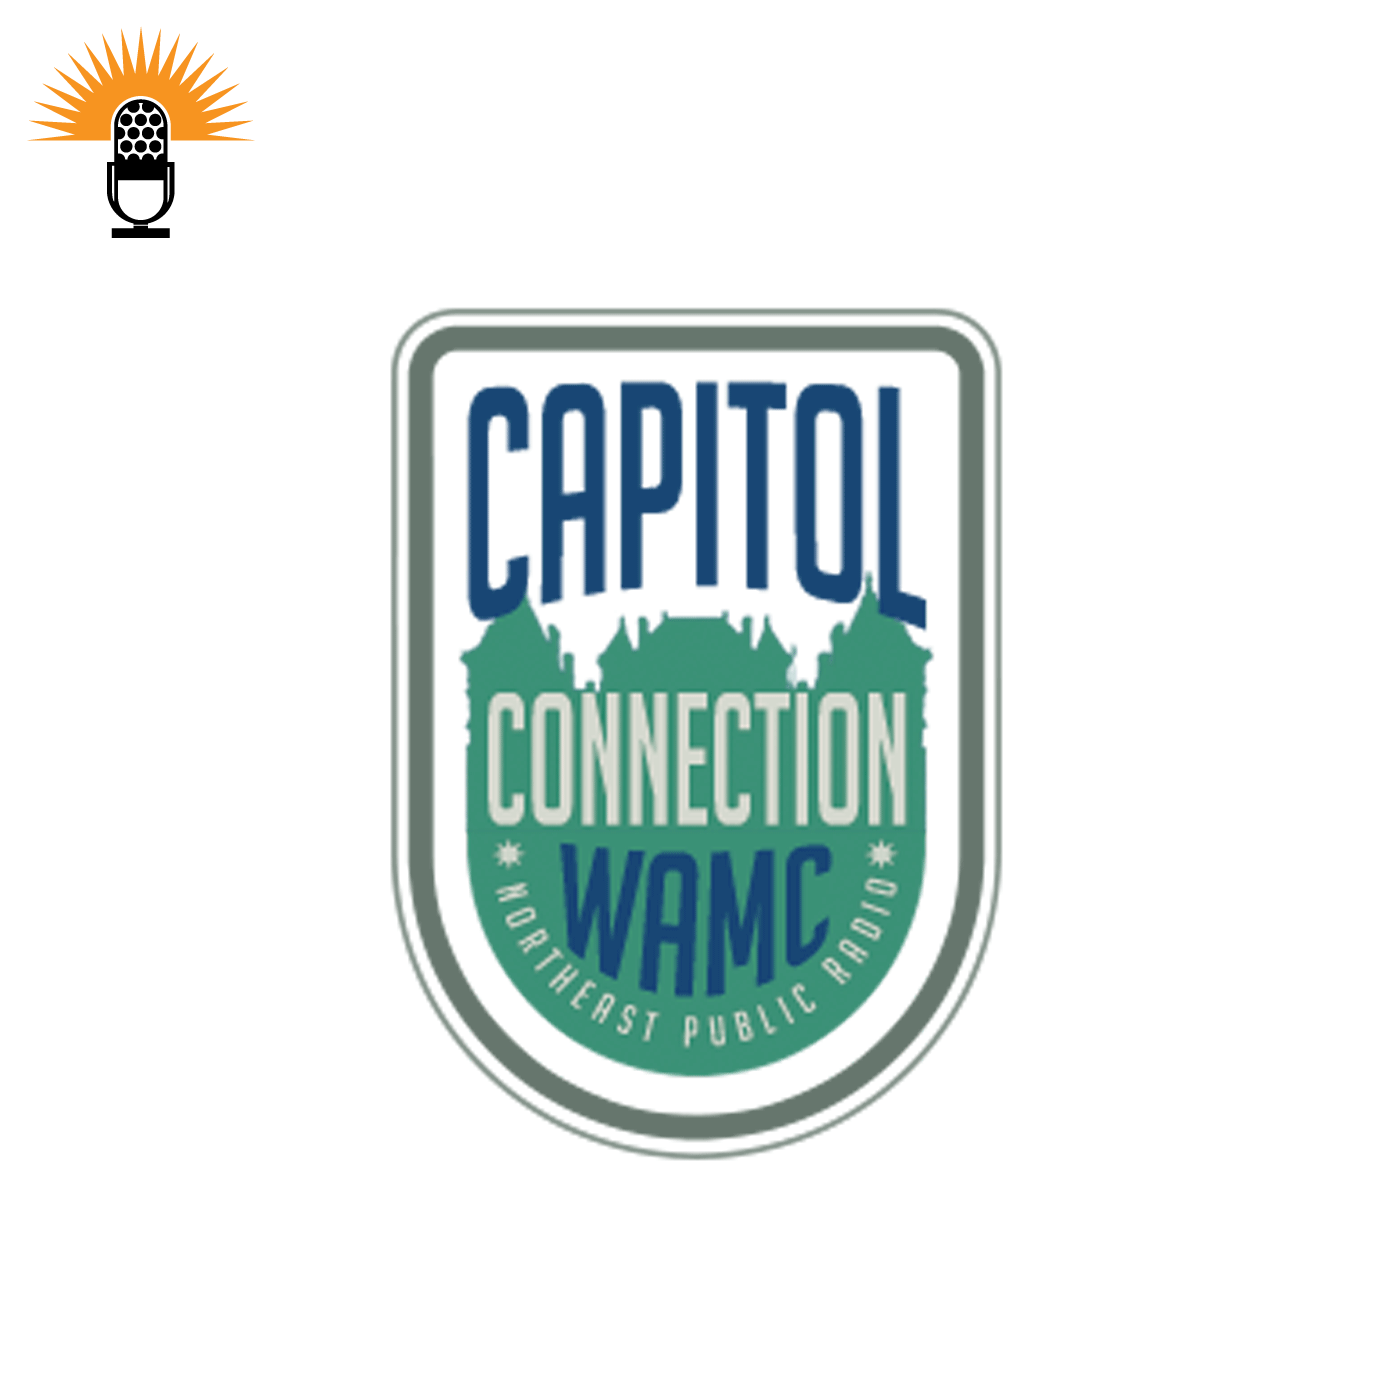 The Capitol Connection - Karen DeWitt, Capital Correspondent for The New York Public News Network